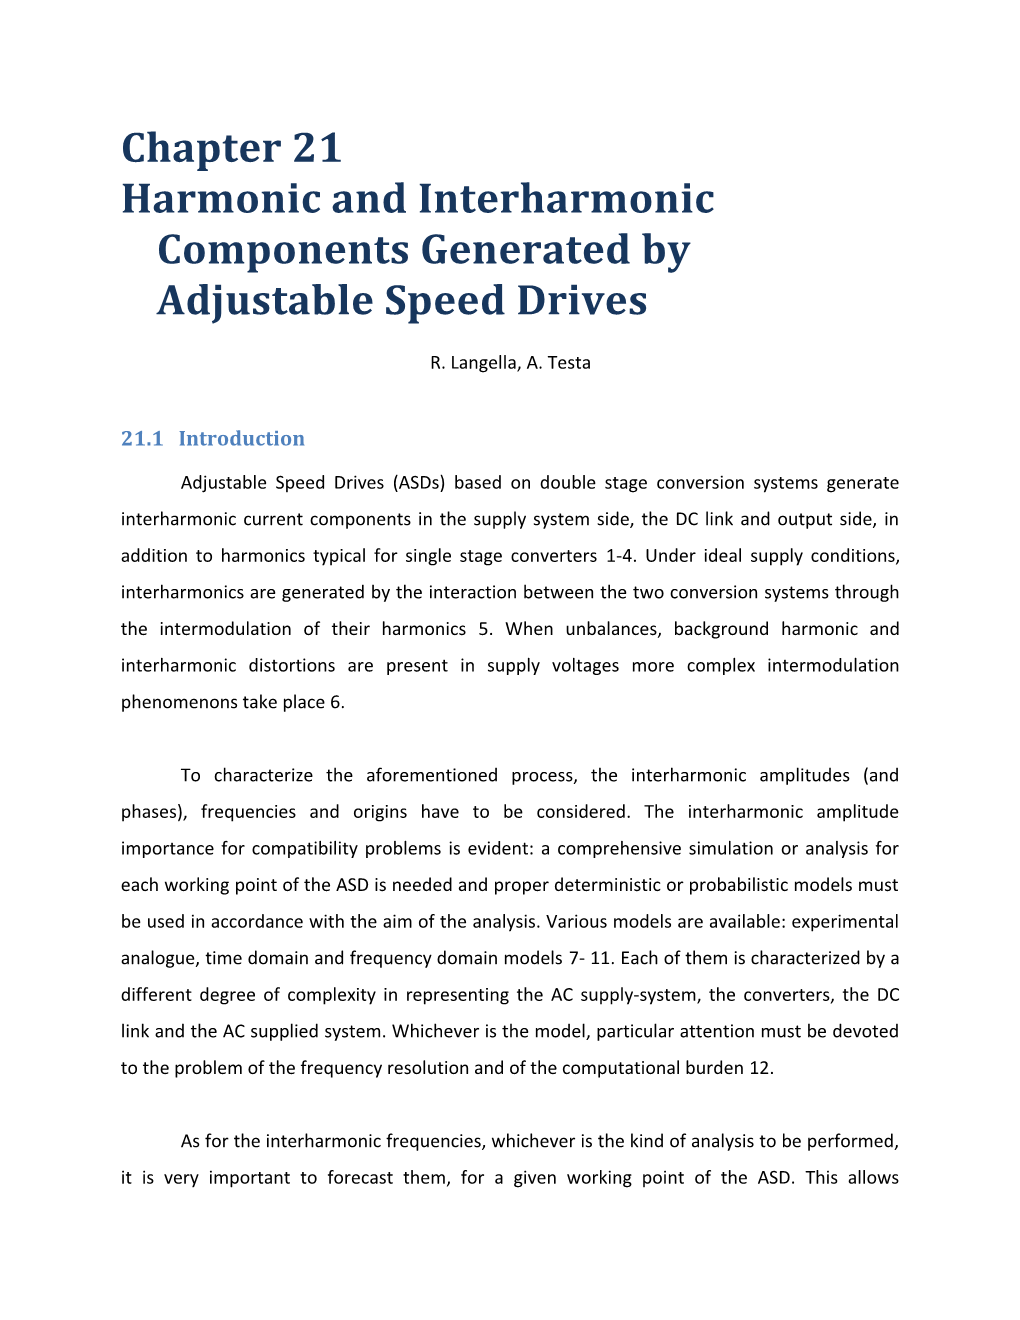 Harmonic and Interharmonic Components Generated by Adjustable Speed Drives